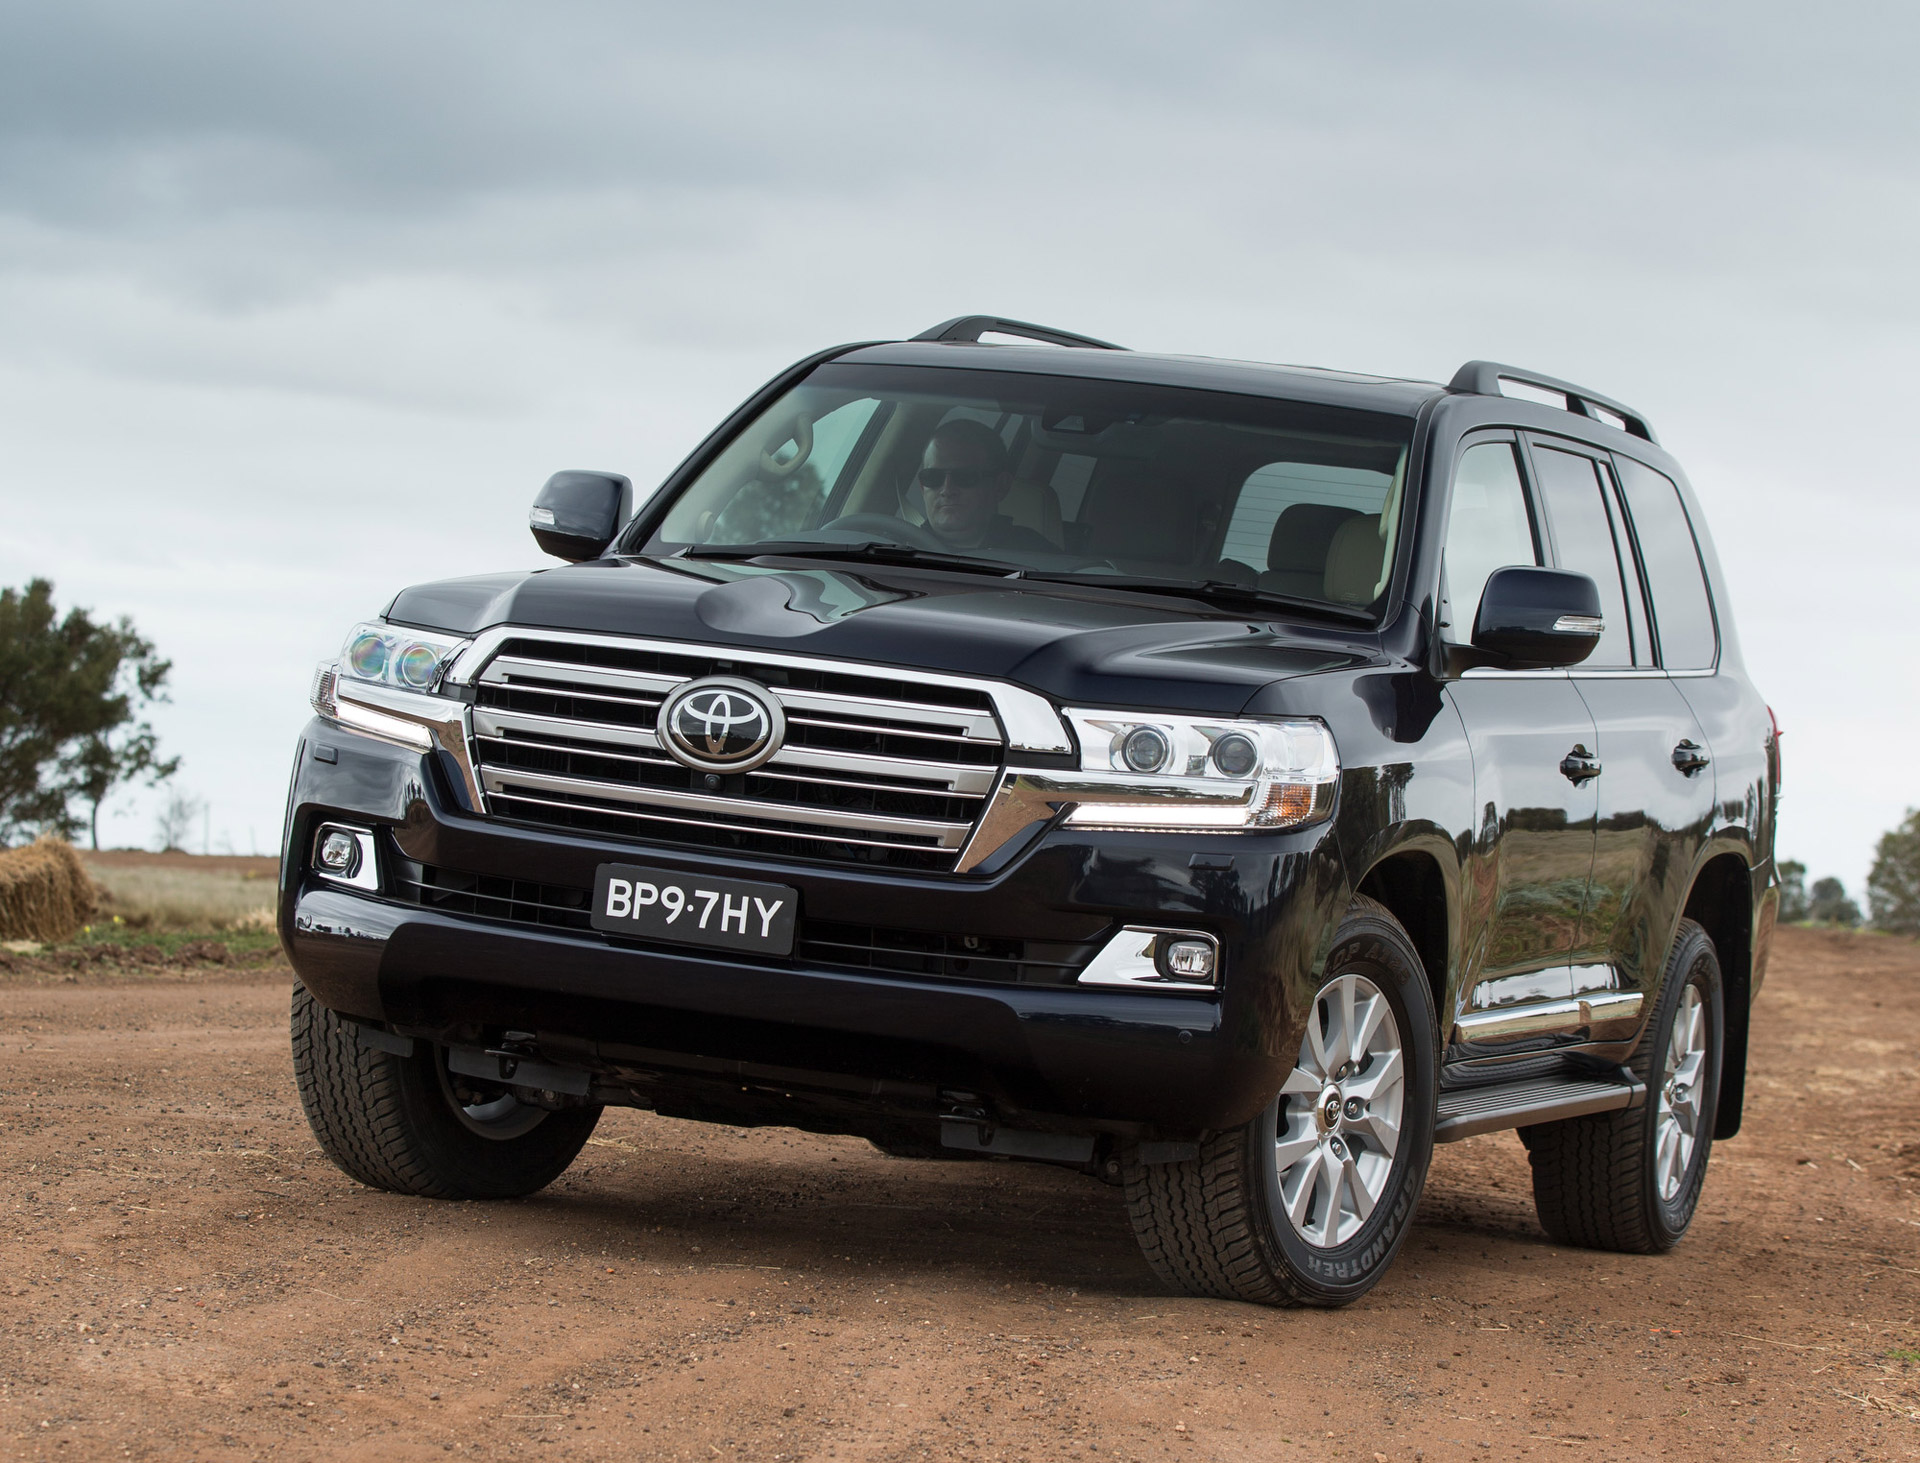 2016 Toyota Land Cruiser Preview: Video